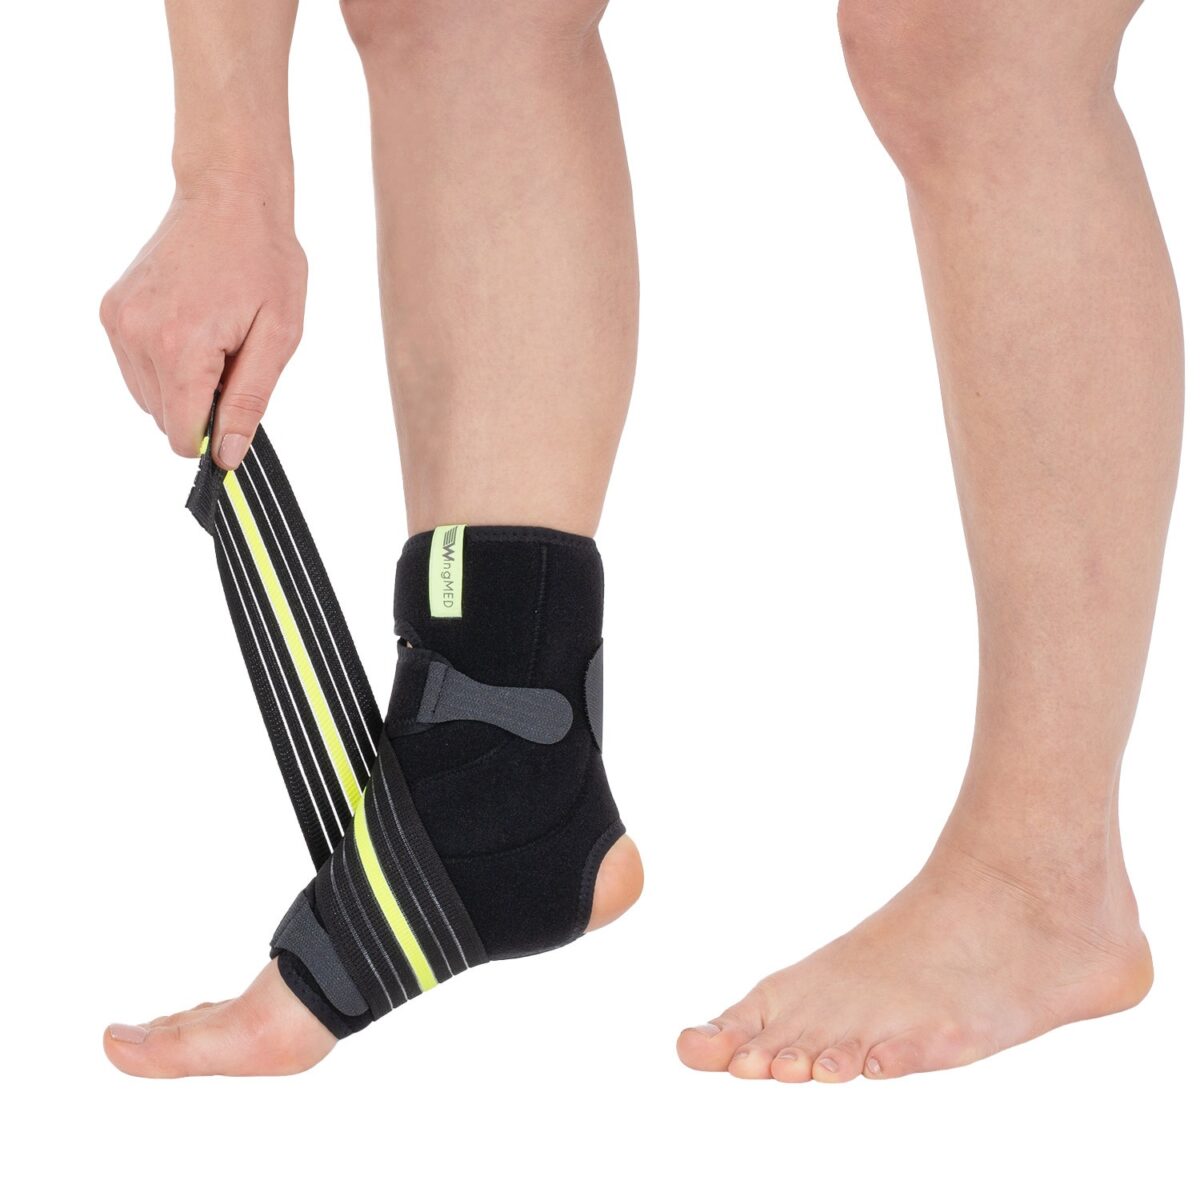 wingmed orthopedic equipments W606 ligament ankle support with 8 strap 67 1